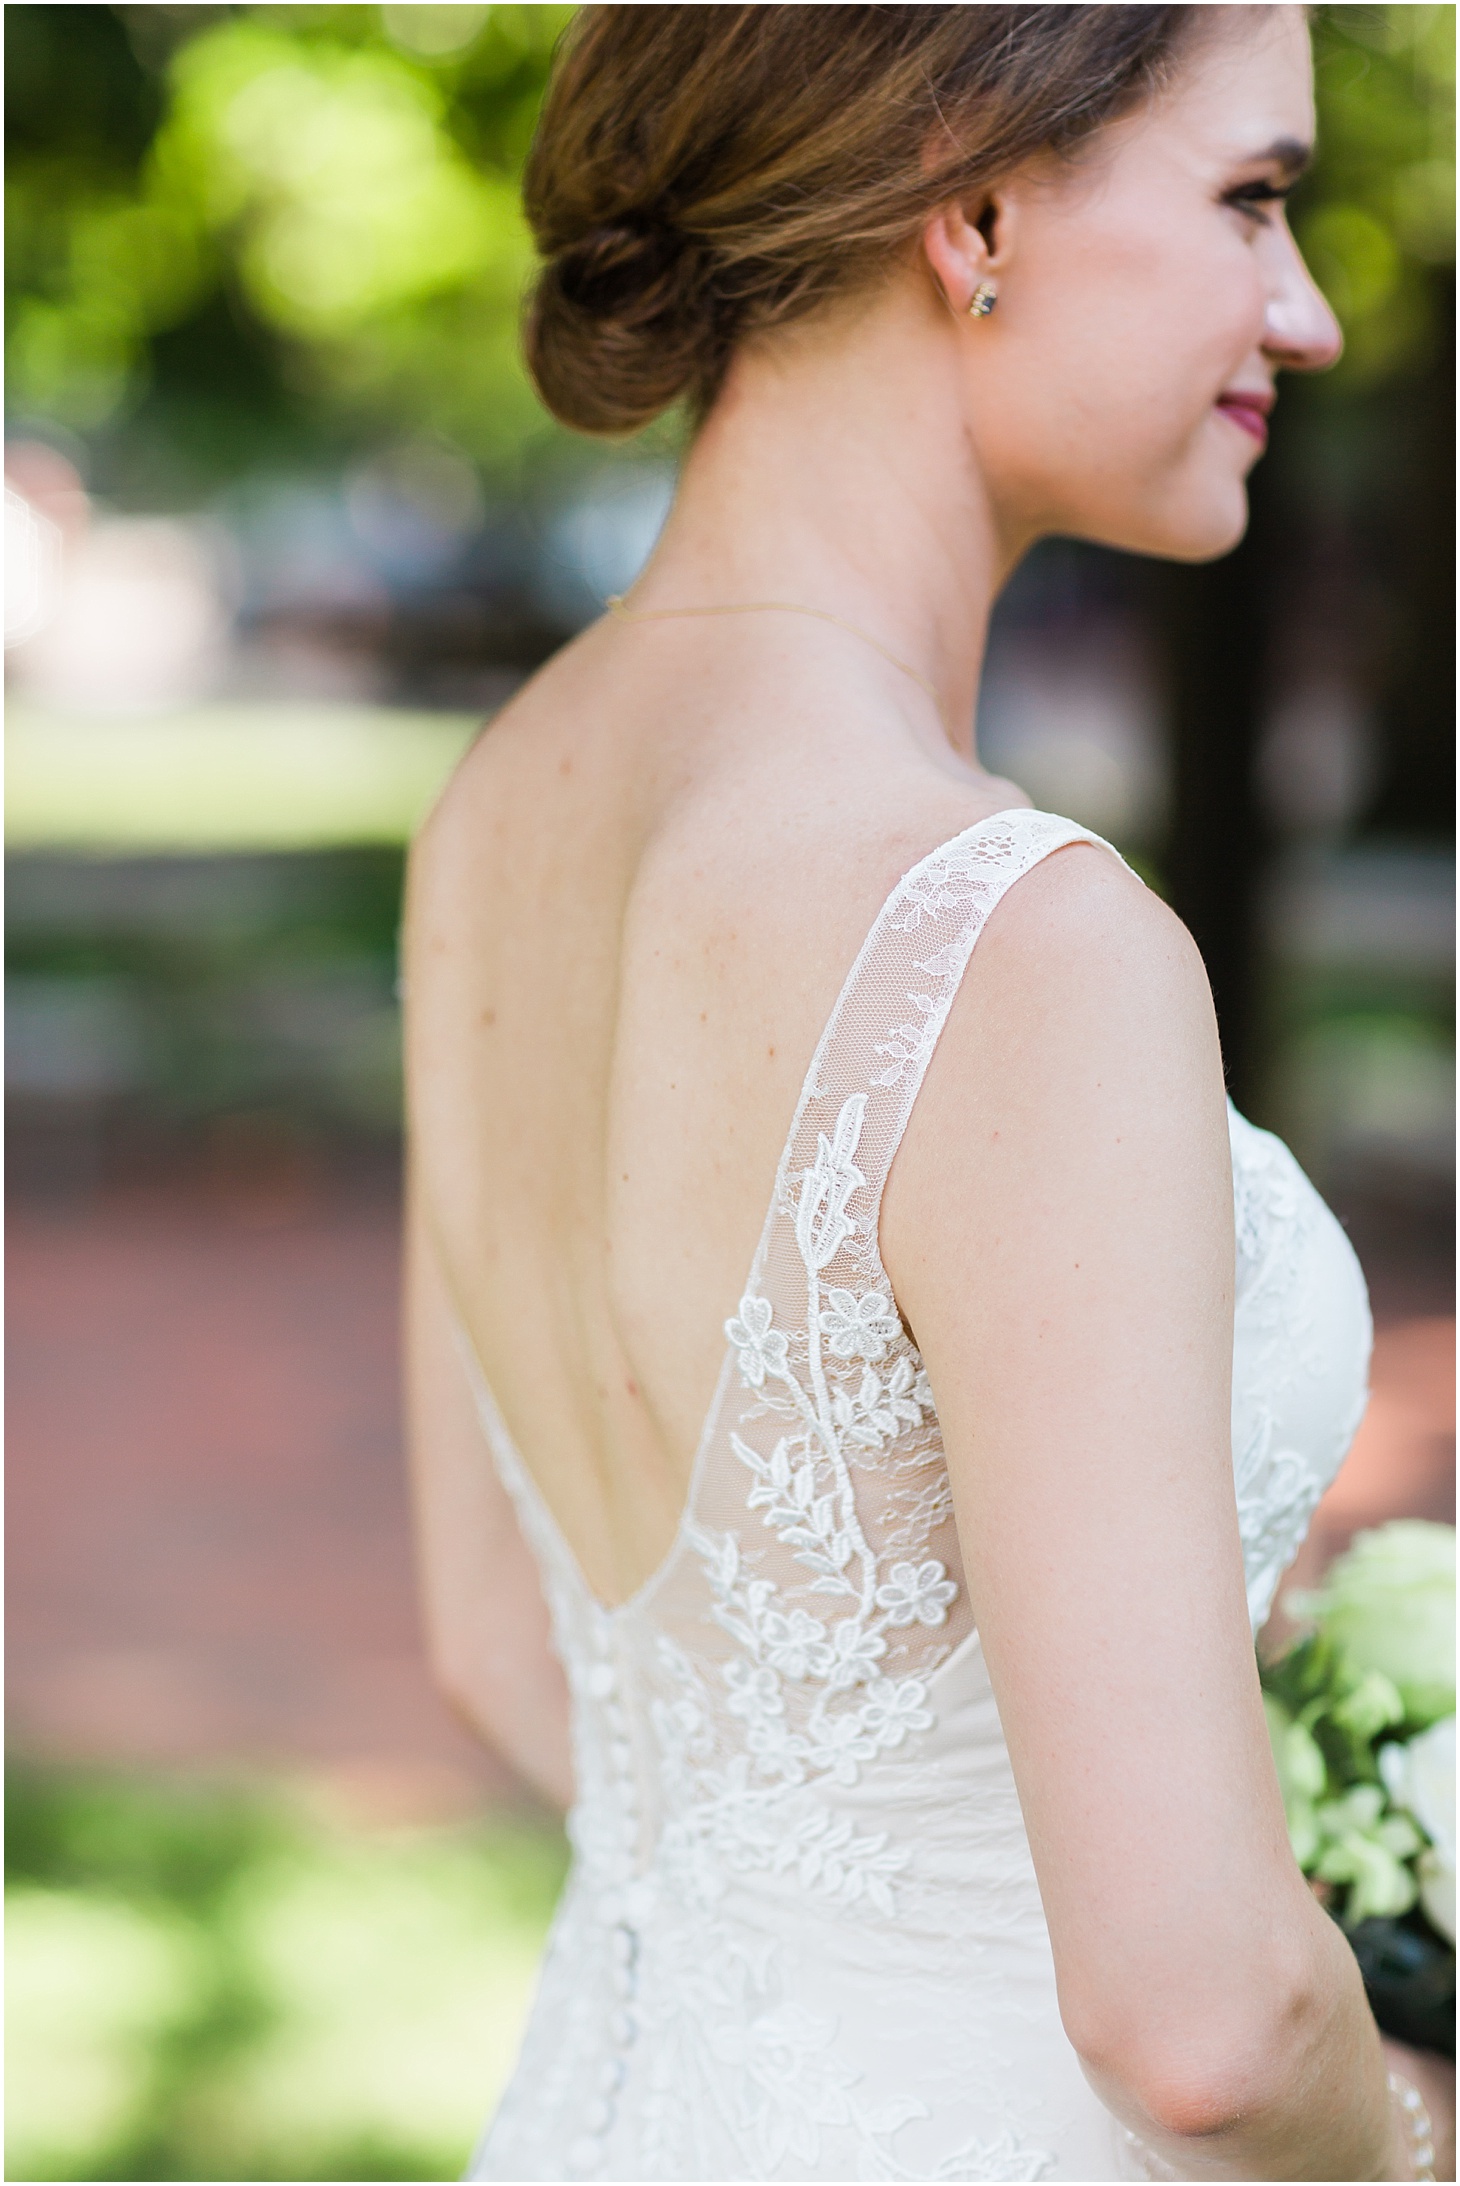 Wedding Portraits in Lafayette Square, Black Tie Hay-Adams Wedding with Summer Florals, Ceremony at Capitol Hill Baptist Church, Sarah Bradshaw Photography, DC Wedding Photographer